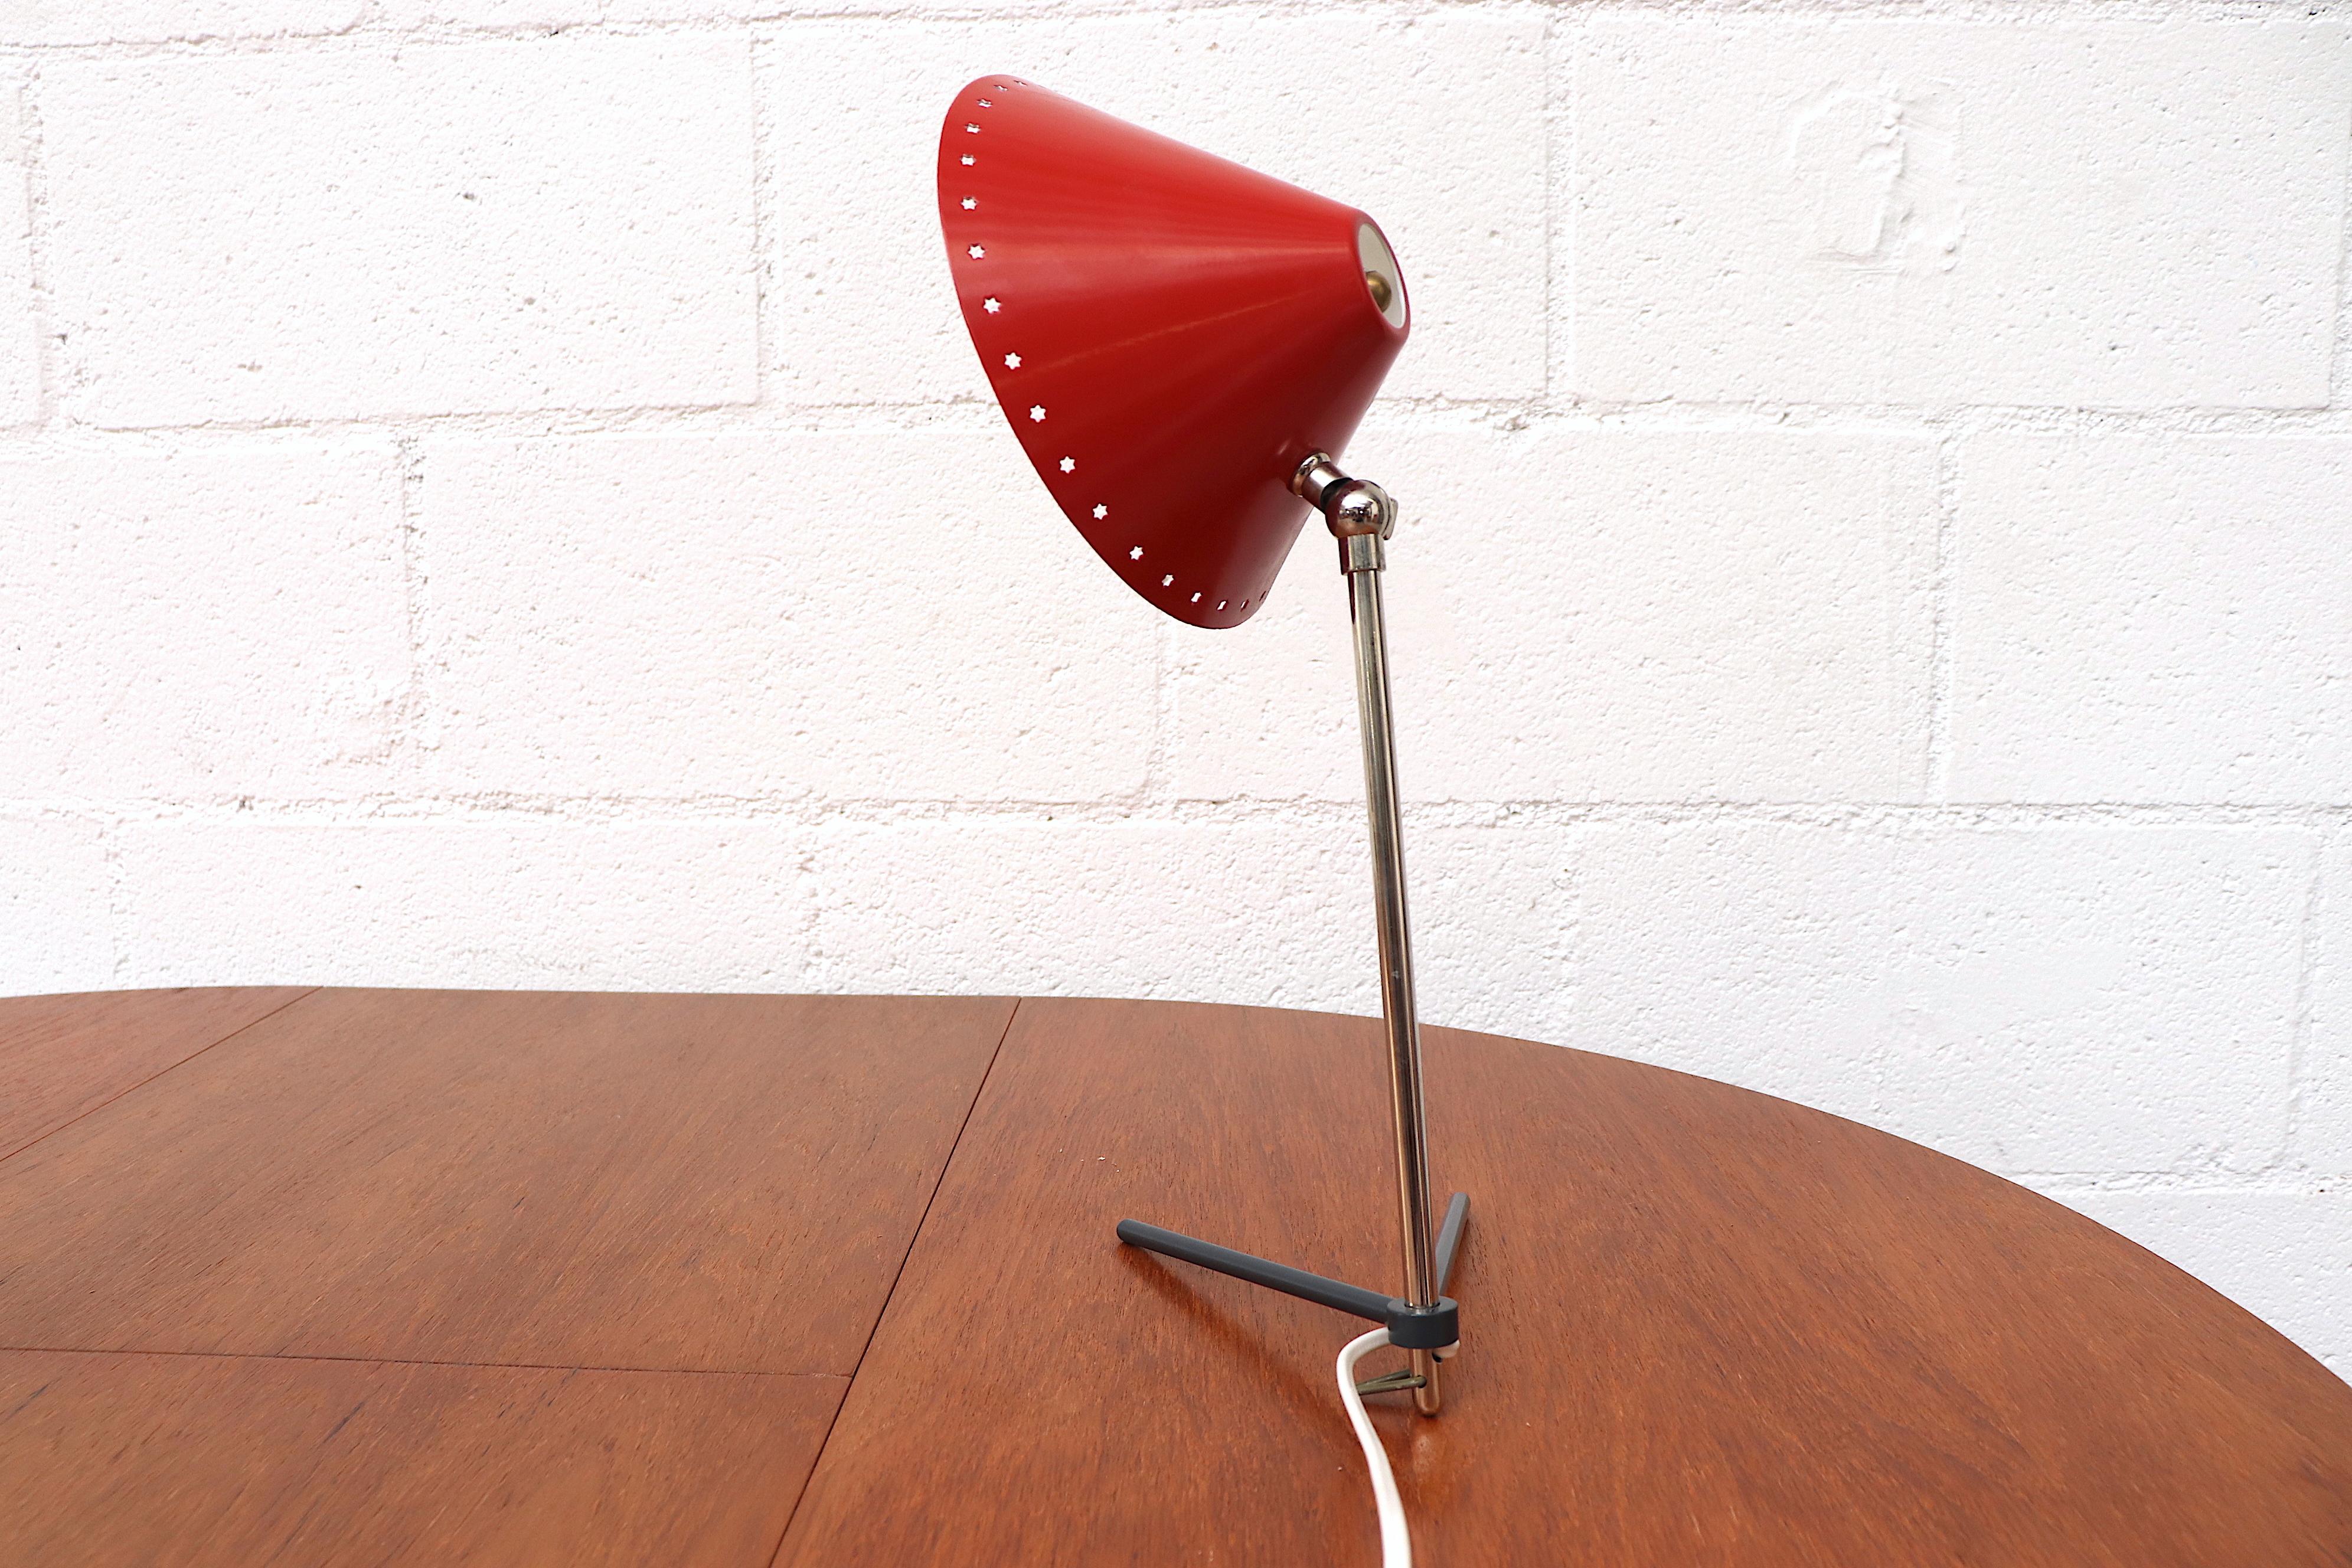 Metal Hala Zeist Red Enameled Pinocchio Table or Wall Lamp